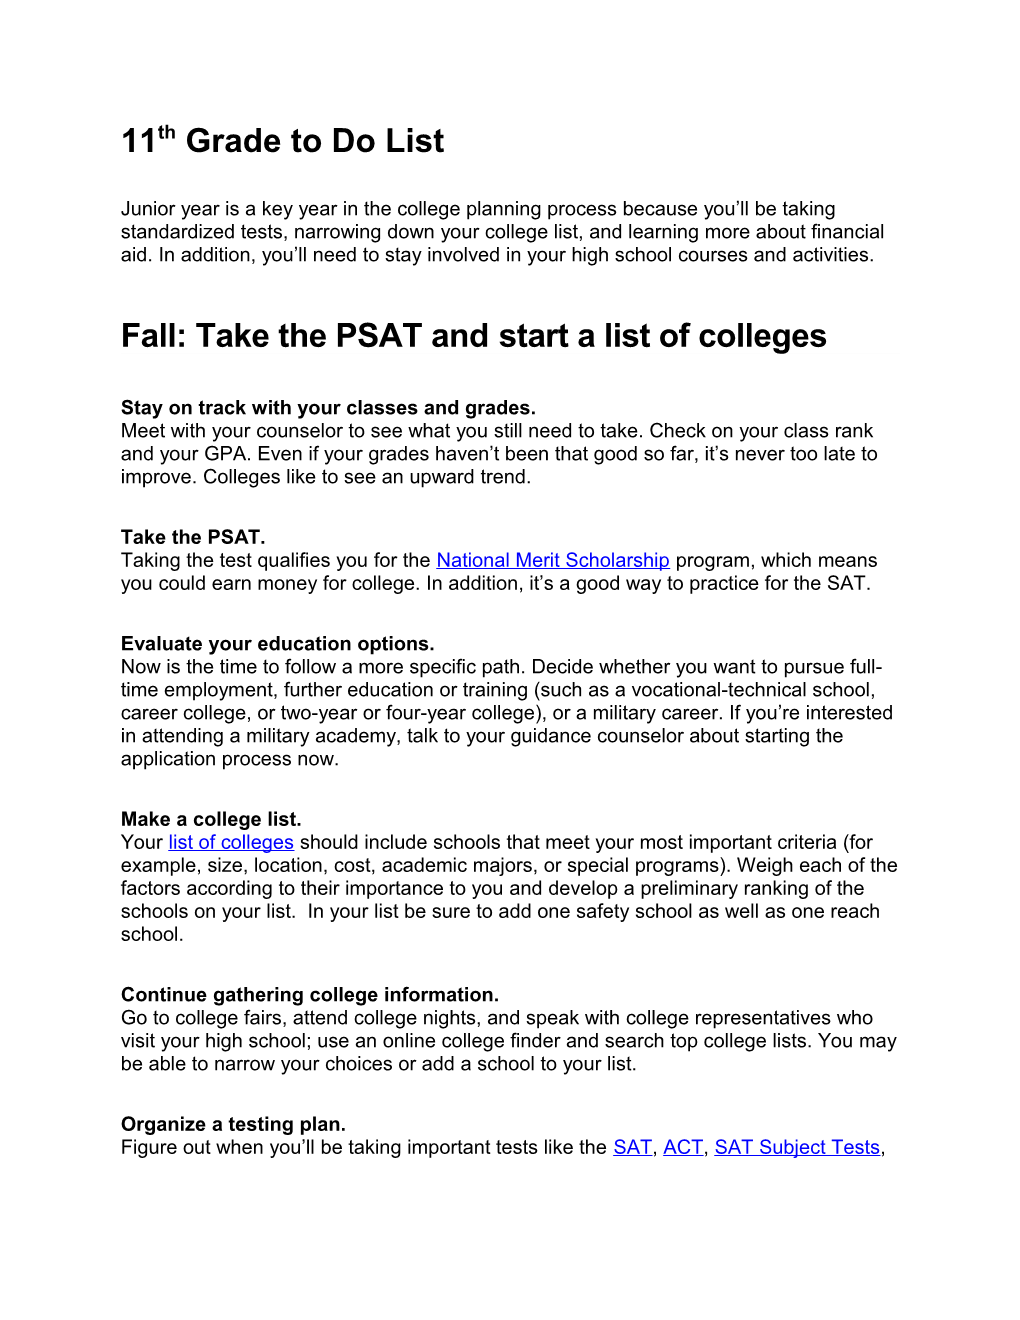 Fall: Take the PSAT Andstart a List of Colleges